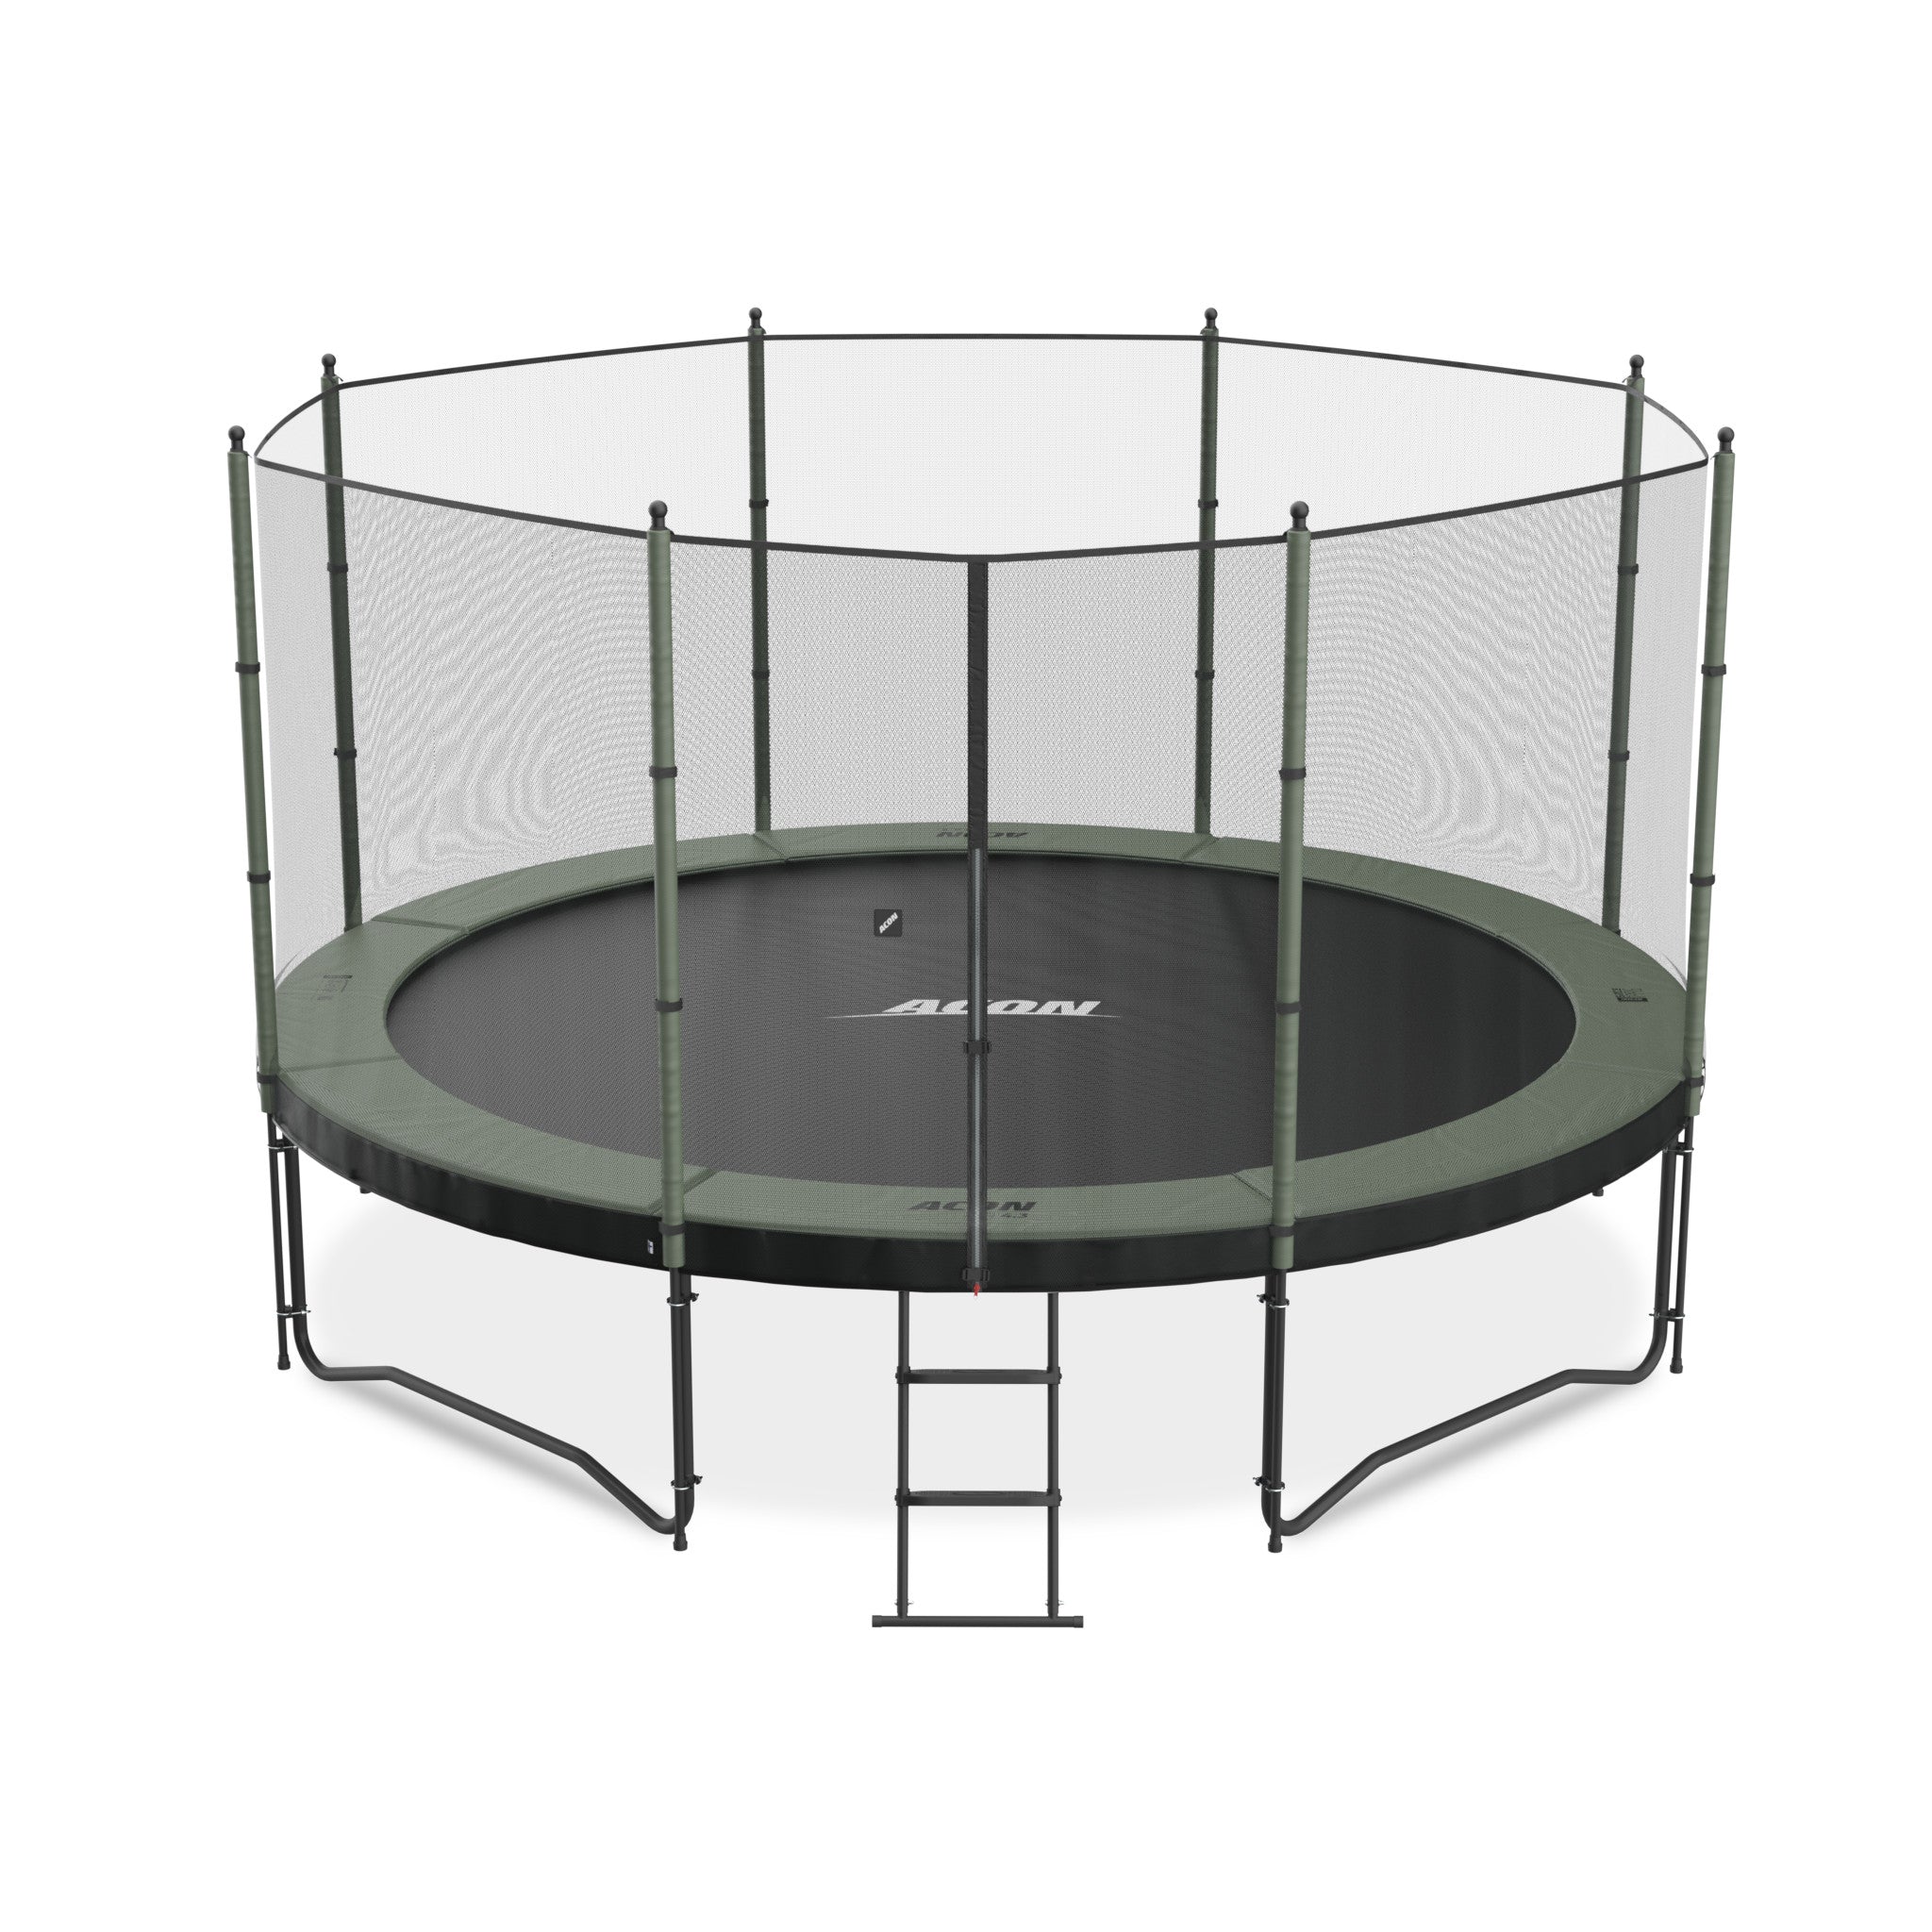 ACON Air 14ft Trampoline with Standard Enclosure and ladder.